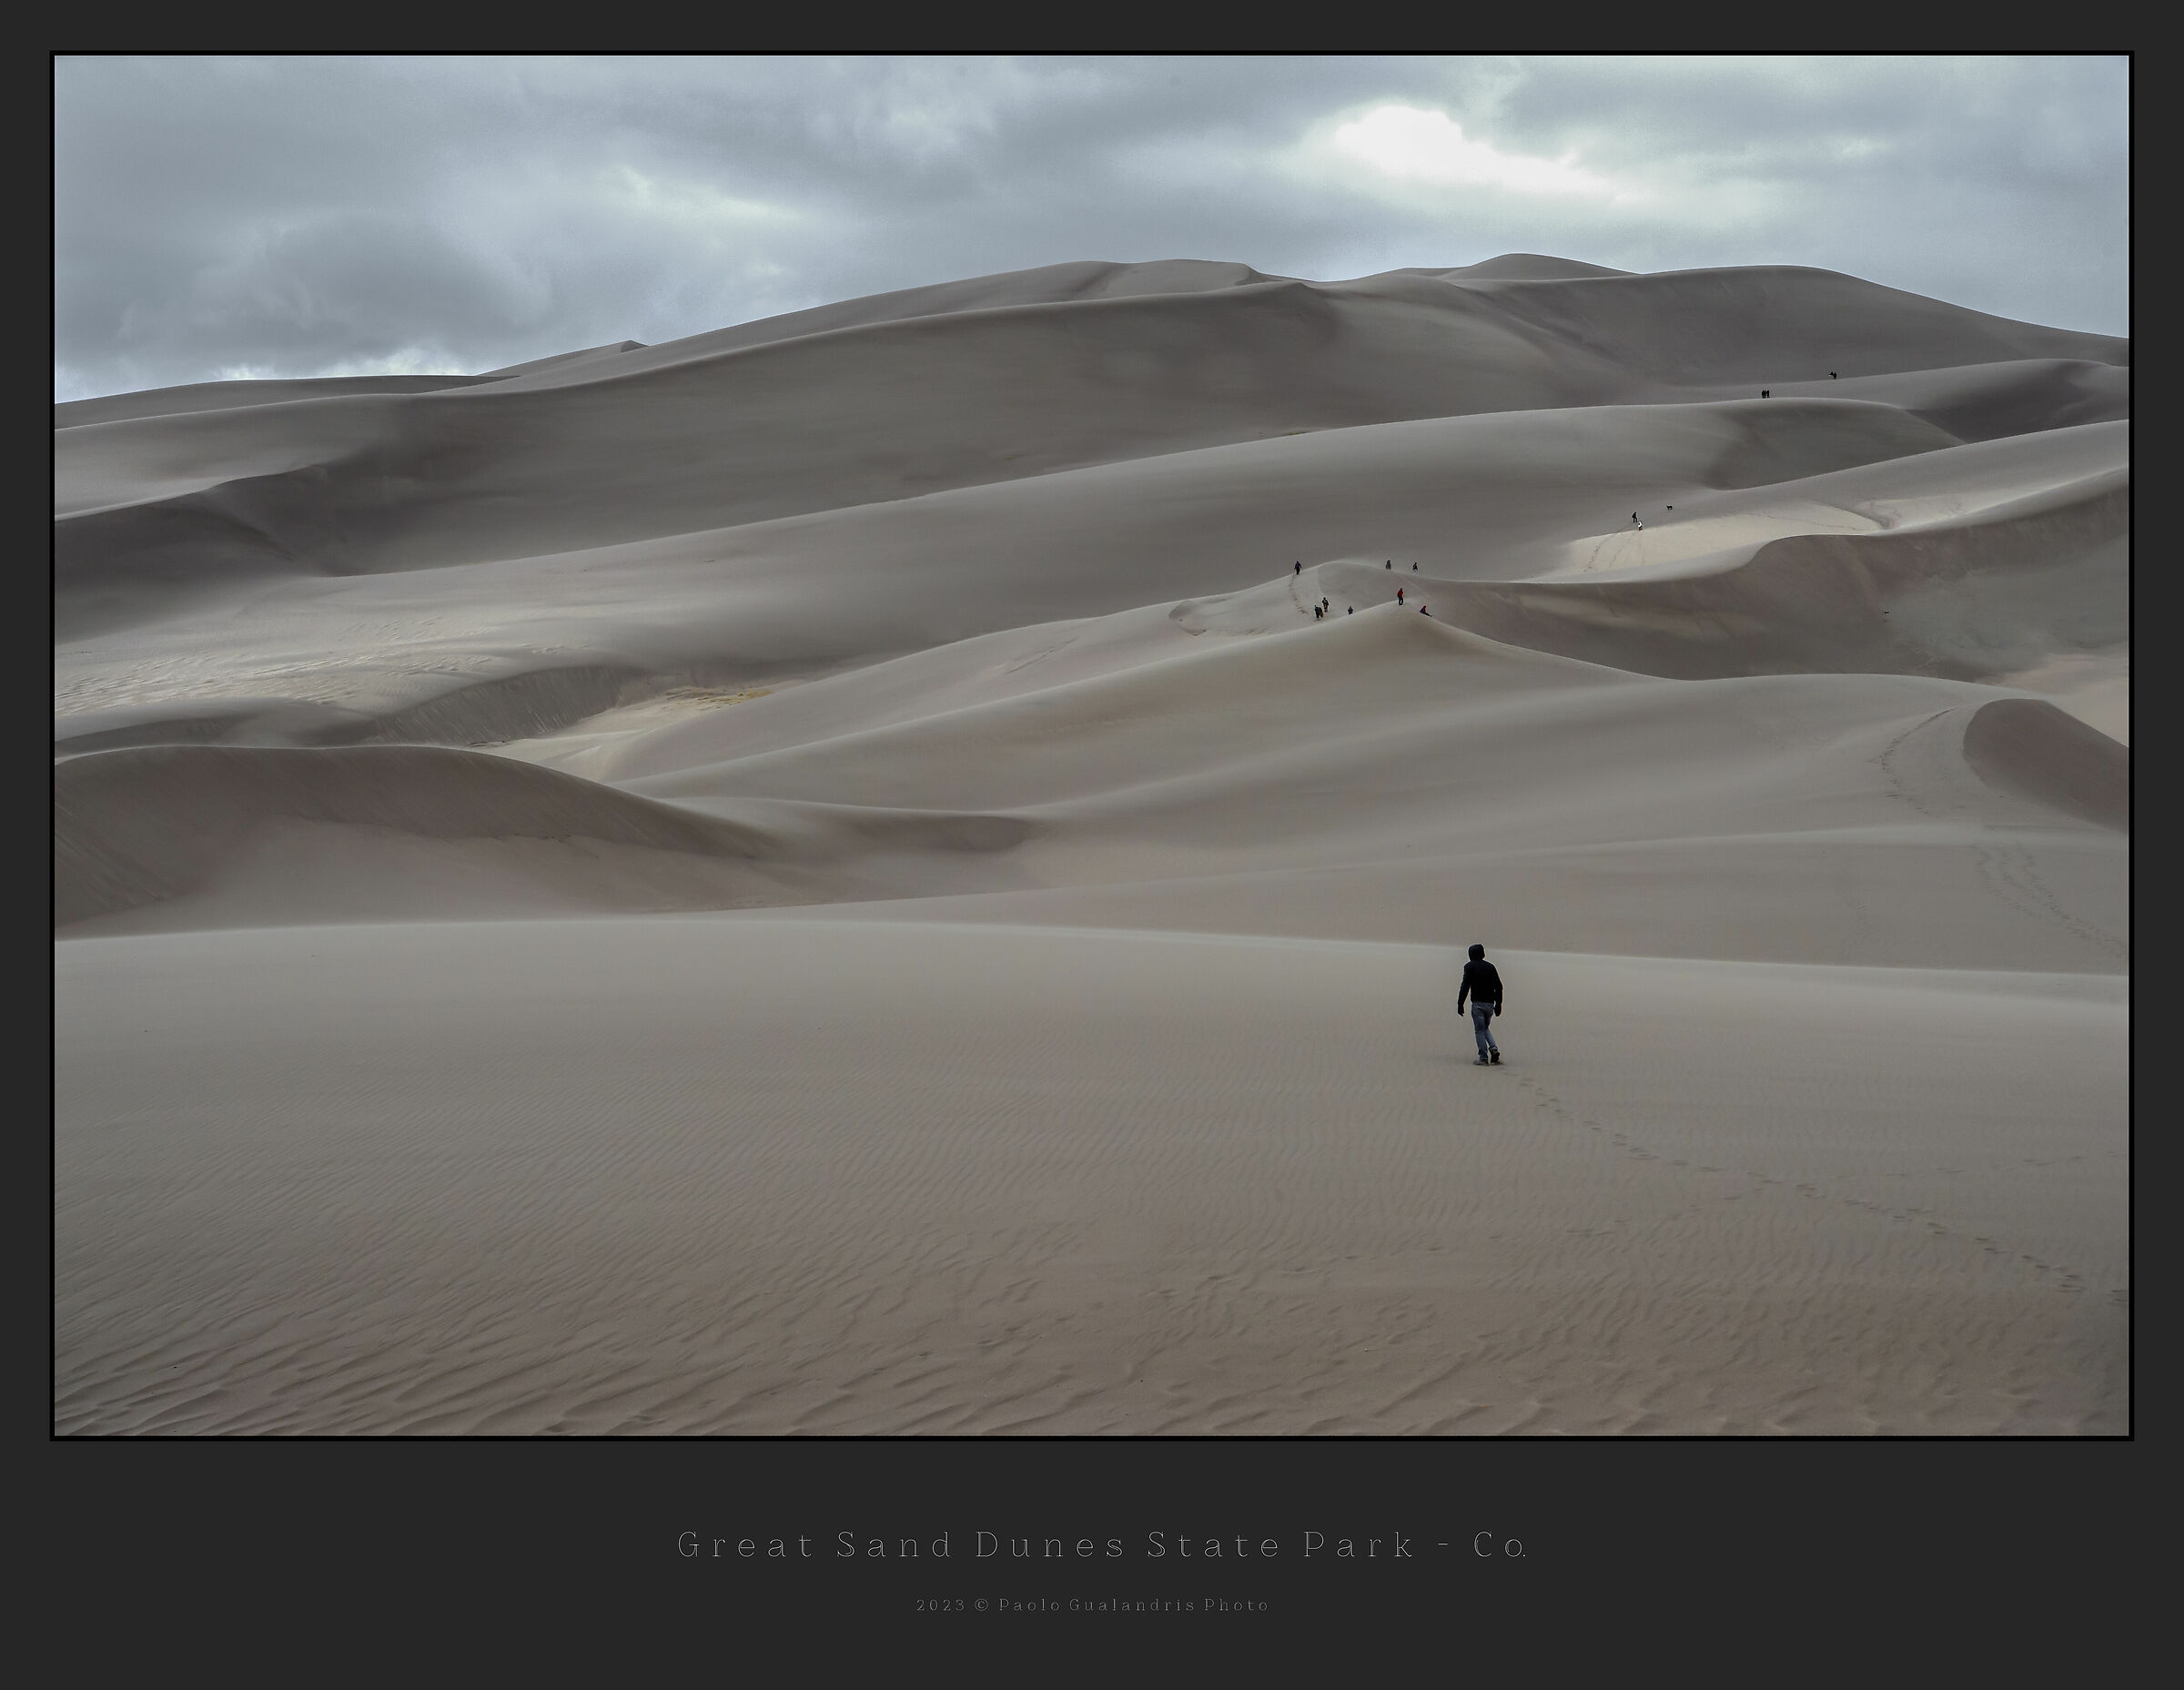 Great Sand Dunes State Park - Co....